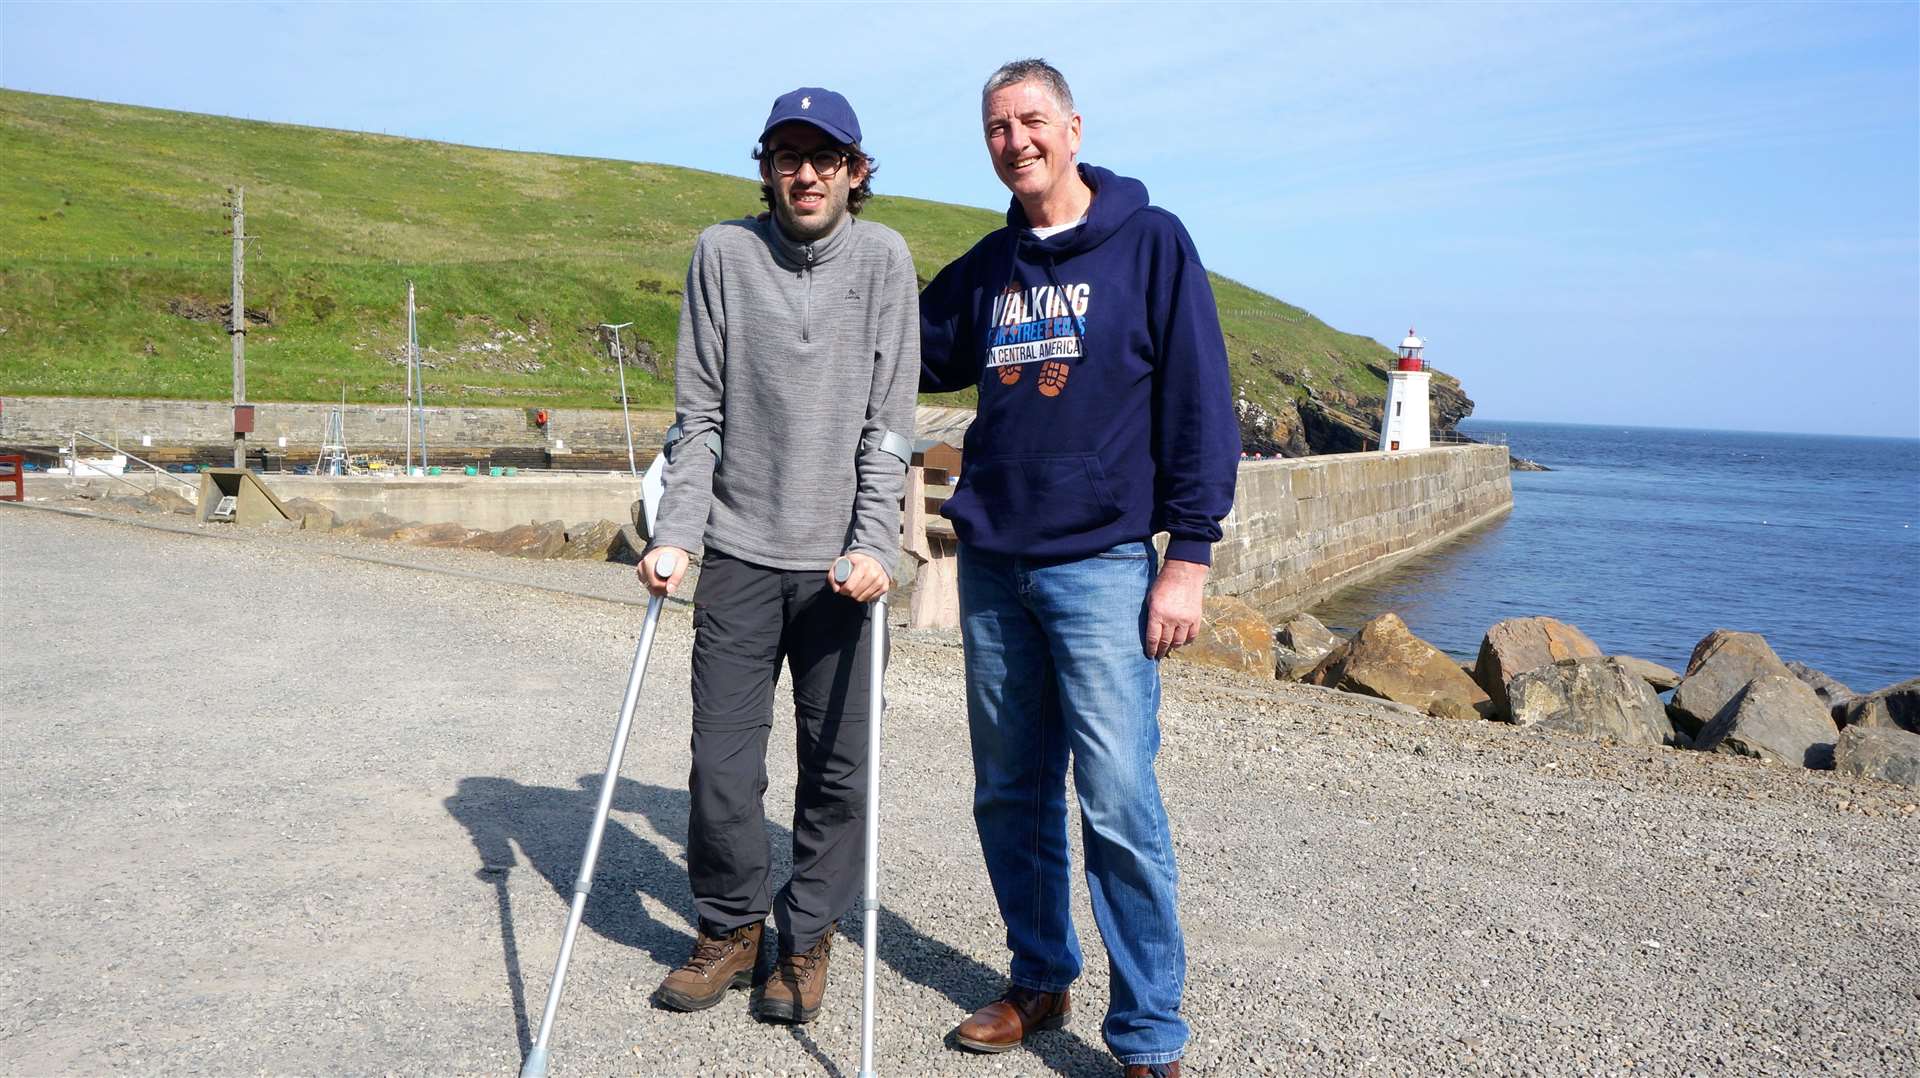 Joseph Soden, left, suffered an injury on the Lejog charity walk but his companion Duncan Dyason managed to continue. They were photographed in Lybster on Sunday and completed the walk the following day. Picture: DGS